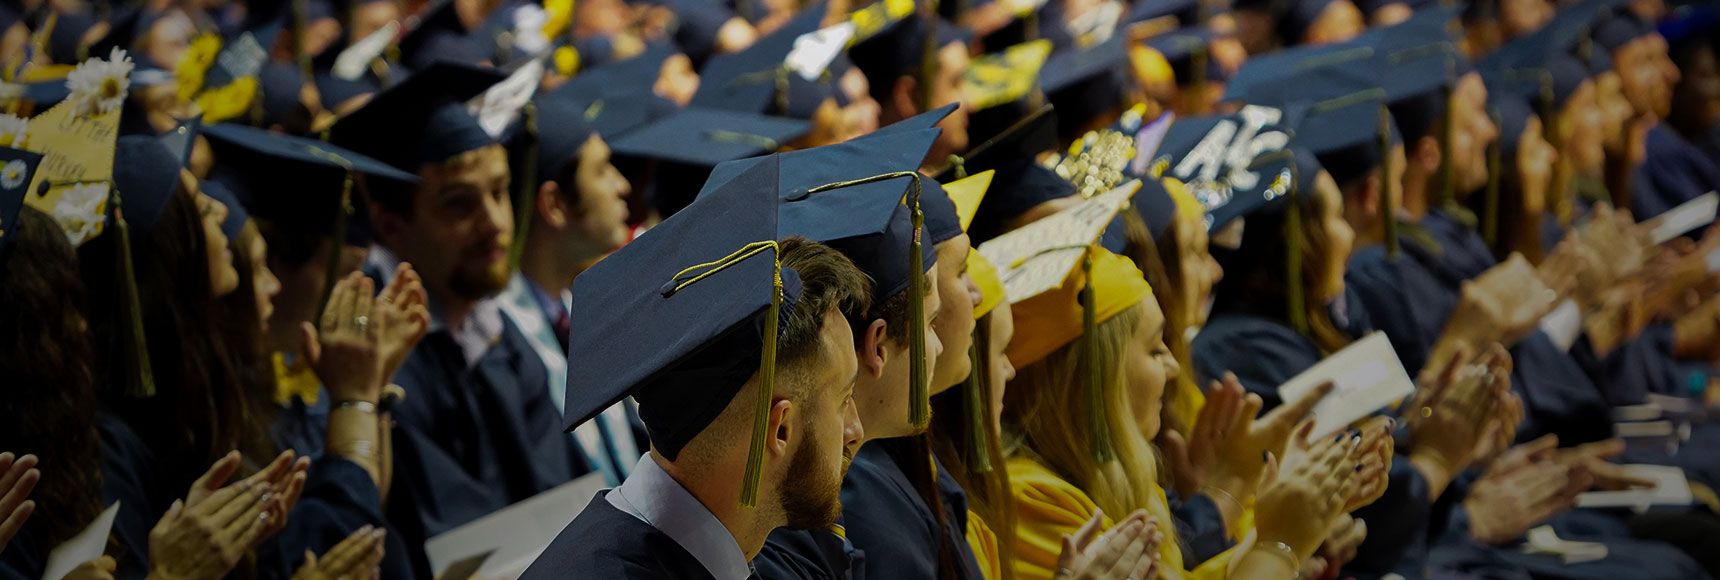 Students clapping during commencement